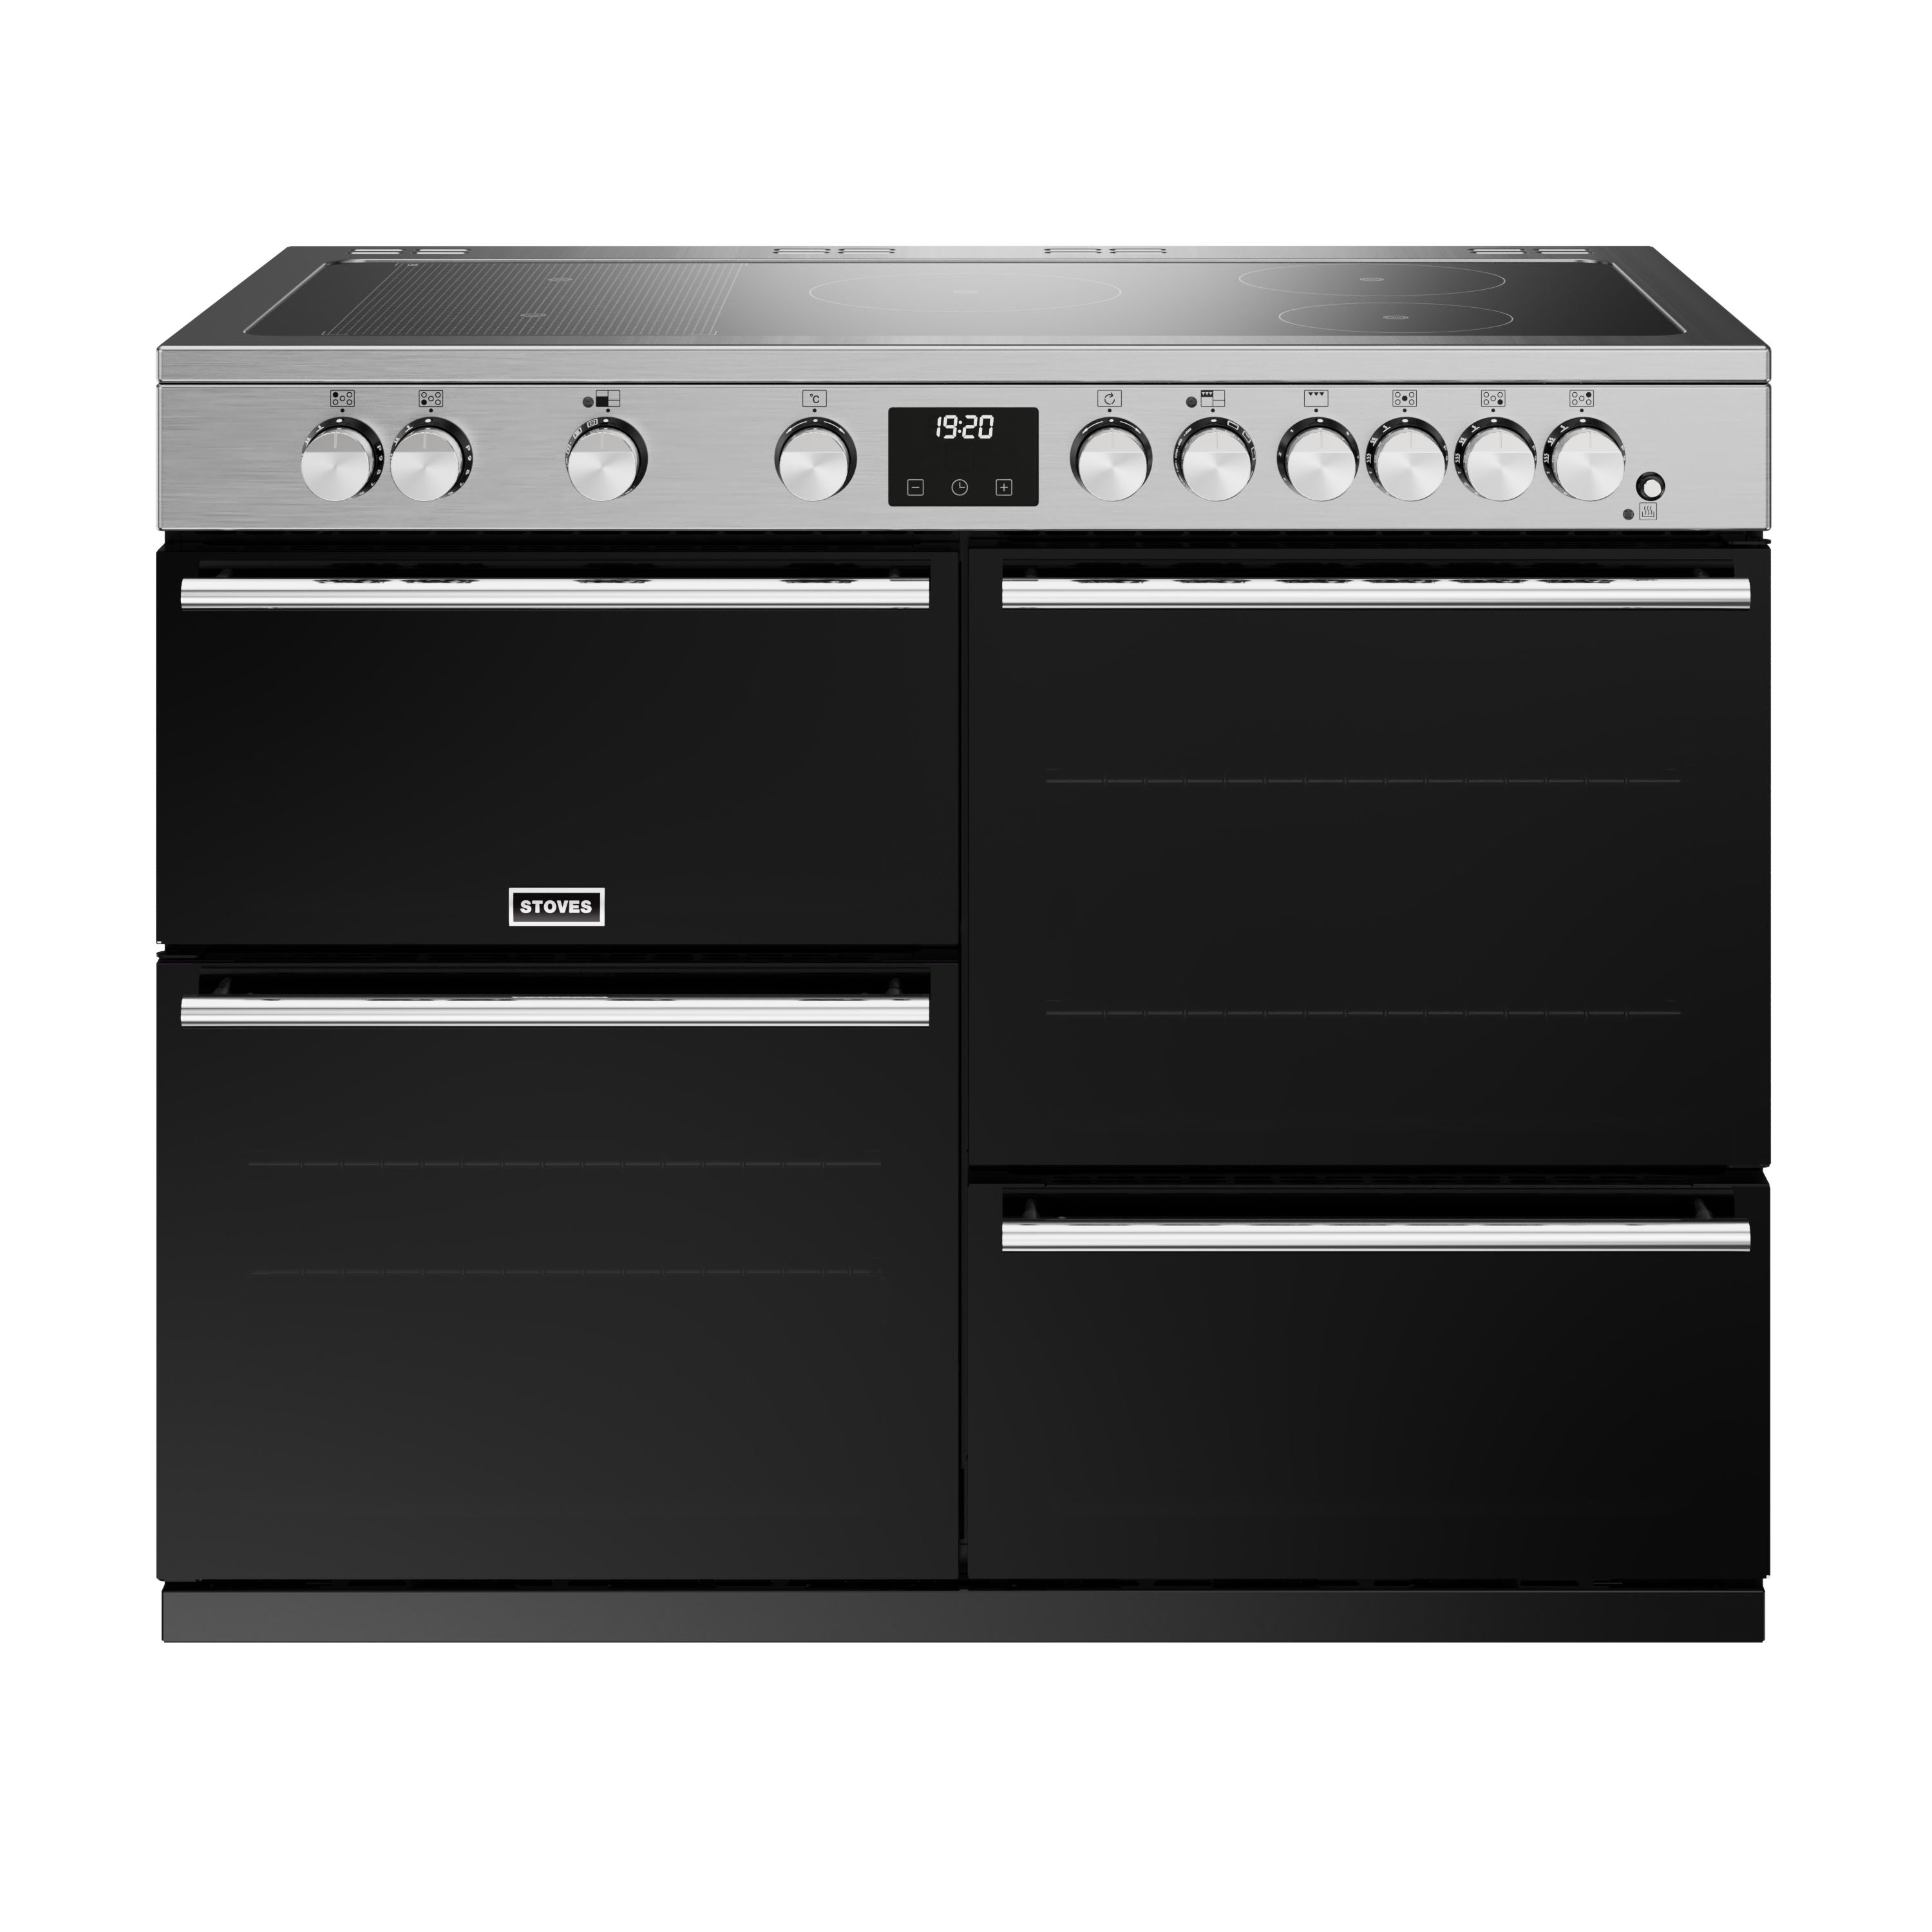 110cm electric induction range cooker with a 5 zone rotary control hob, conventional oven & grill, multifunction main oven with TrueTemp™ digital thermostat, fanned second oven and dedicated slow cook oven